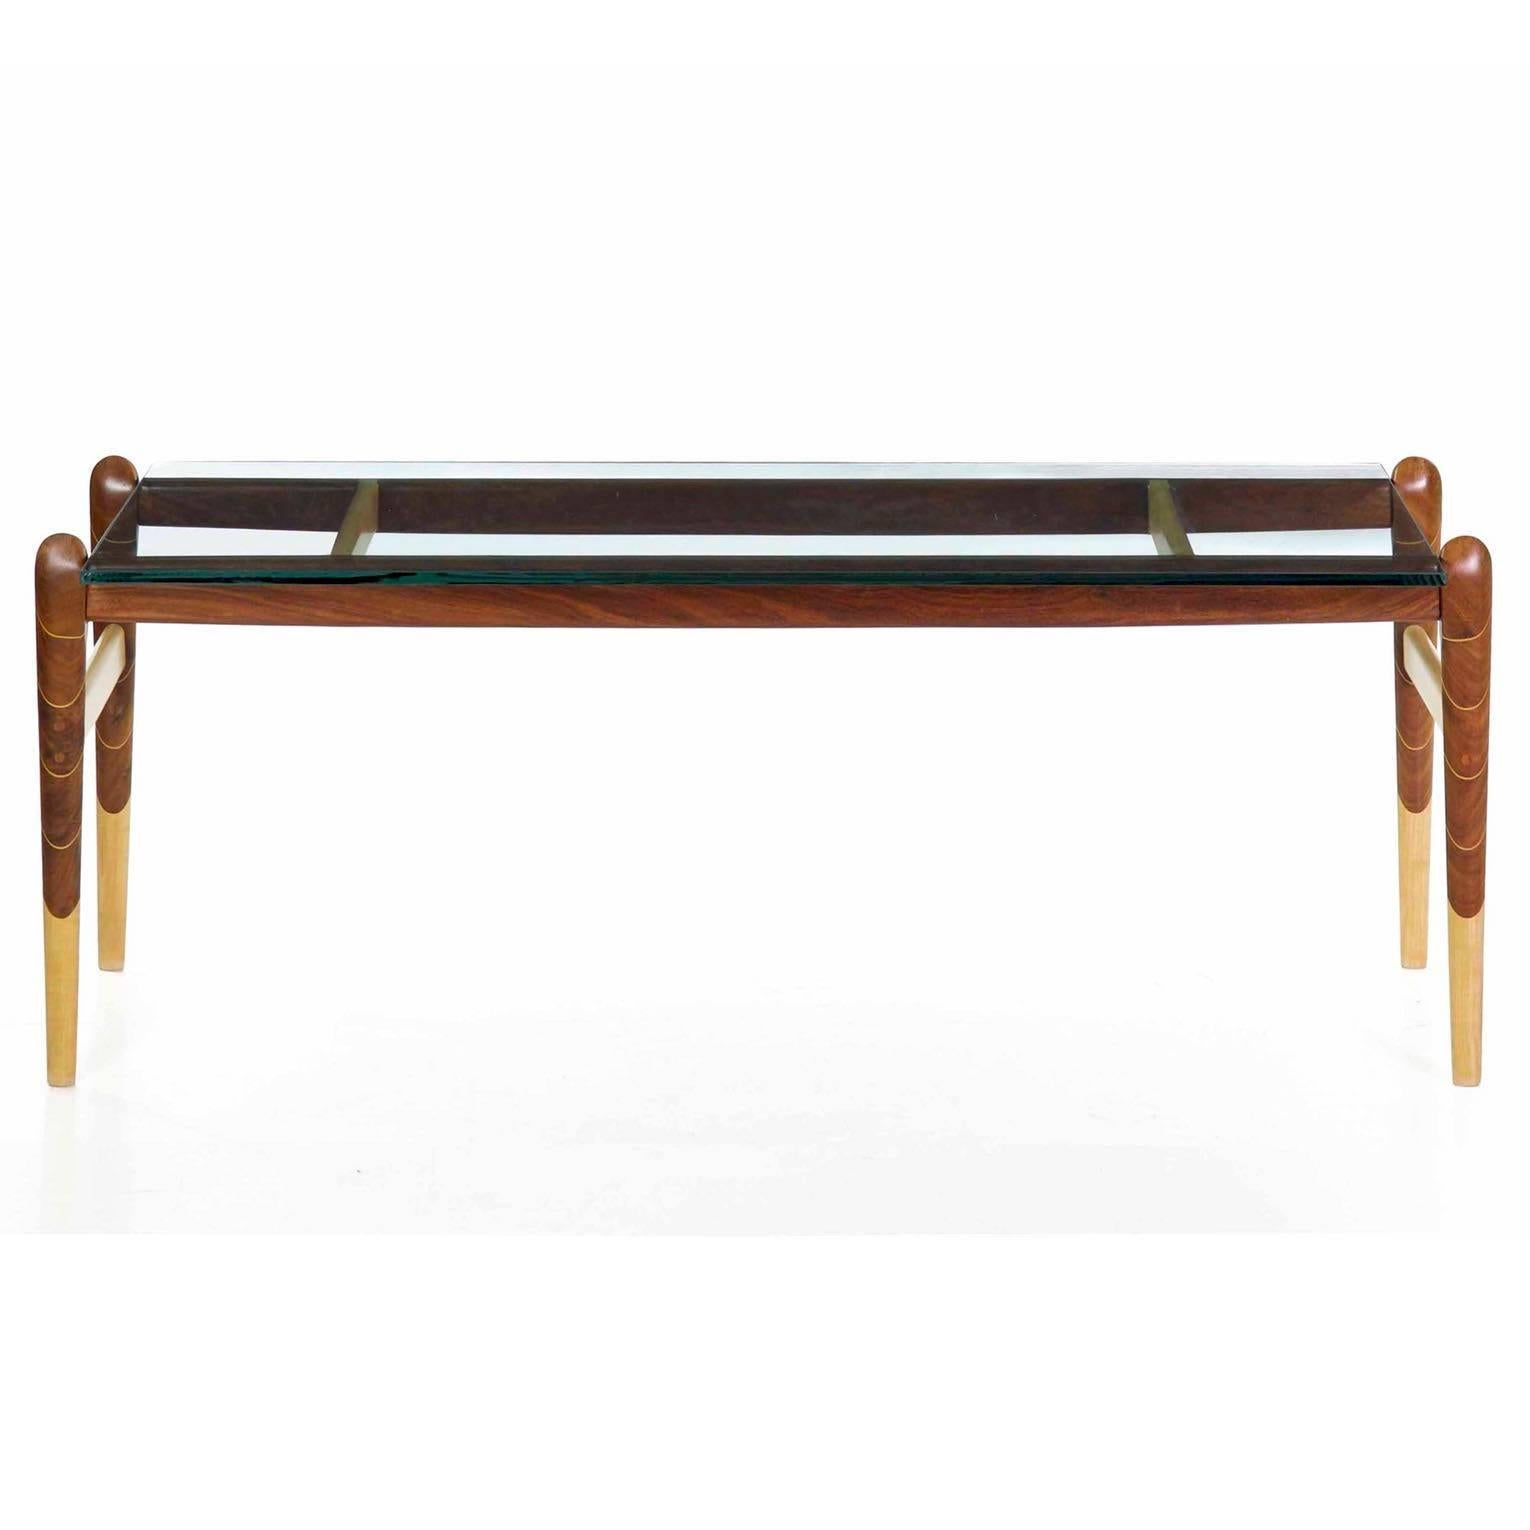 This is such a distinct and interesting coffee table that is relatively simple at a first glance, inordinately complex upon closer examination. The legs formed from maple and walnut, these glued together before carving and sculpting the legs by hand